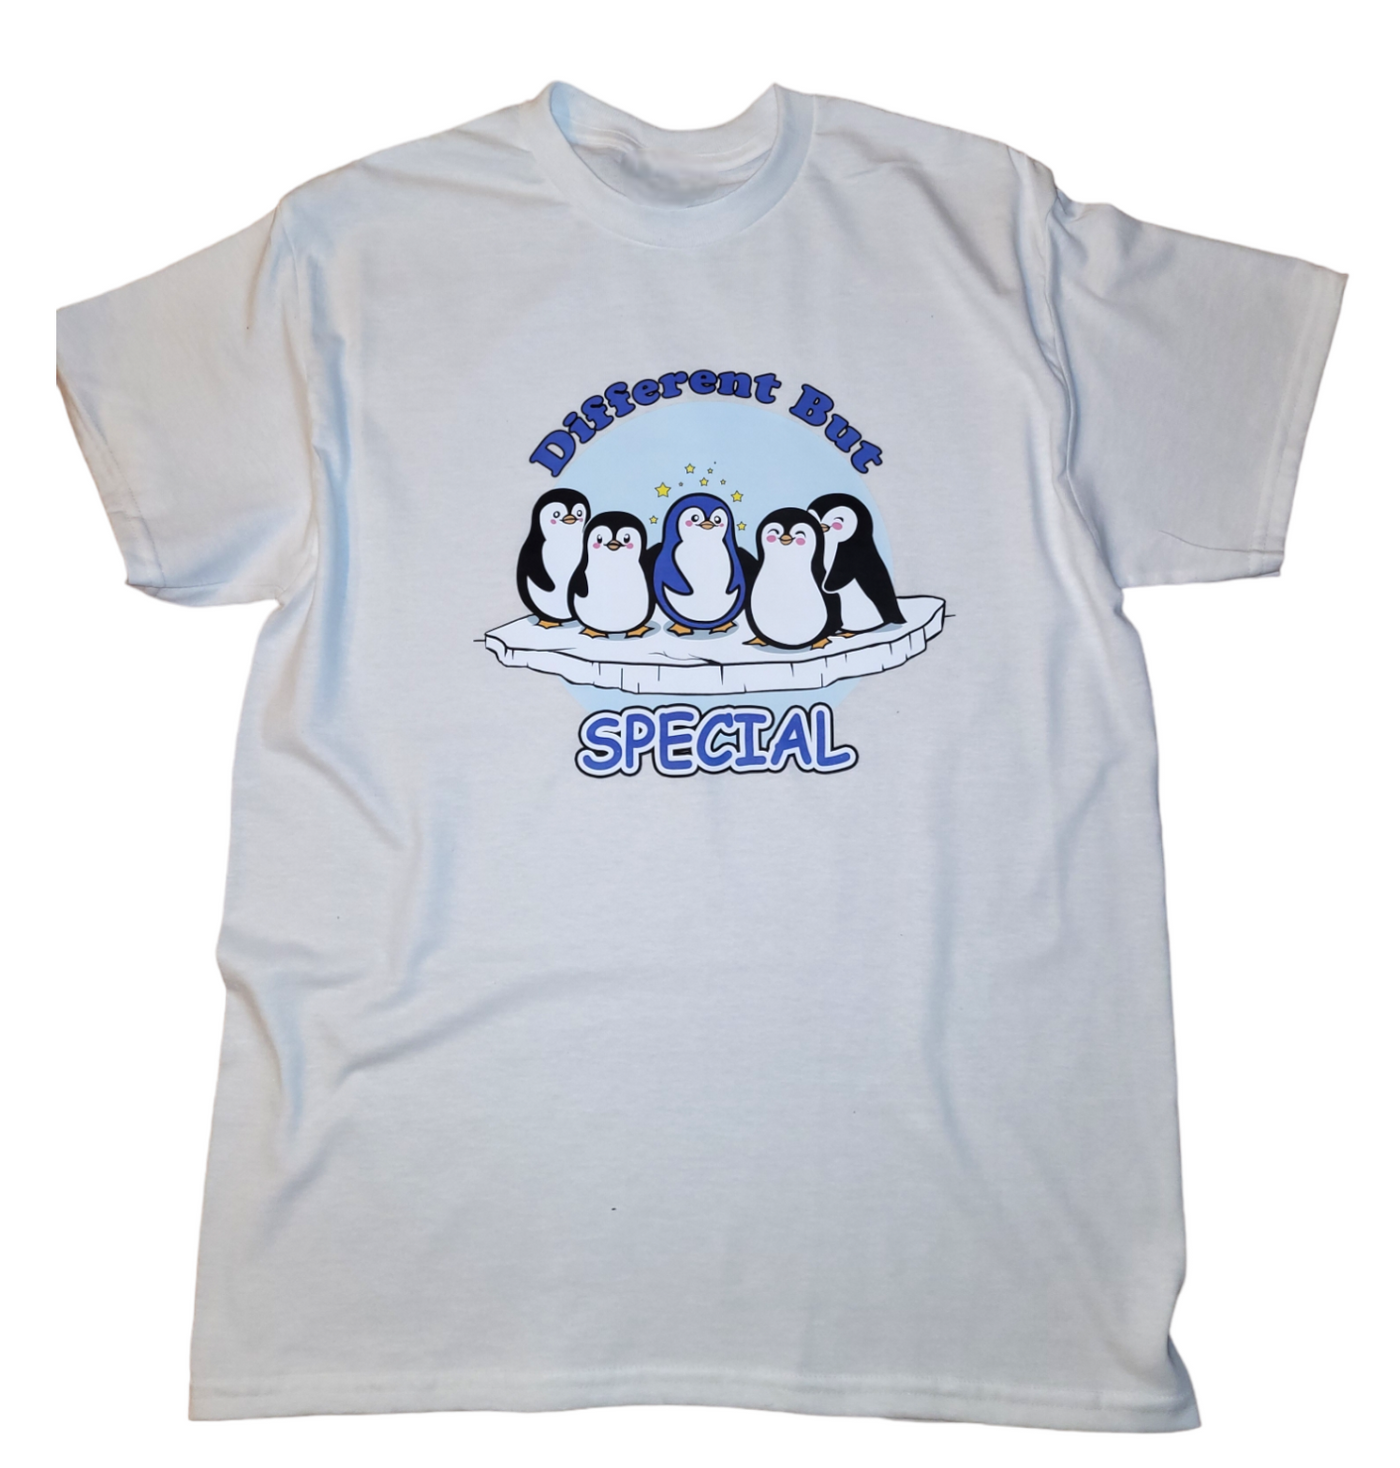 Different but Special t shirt